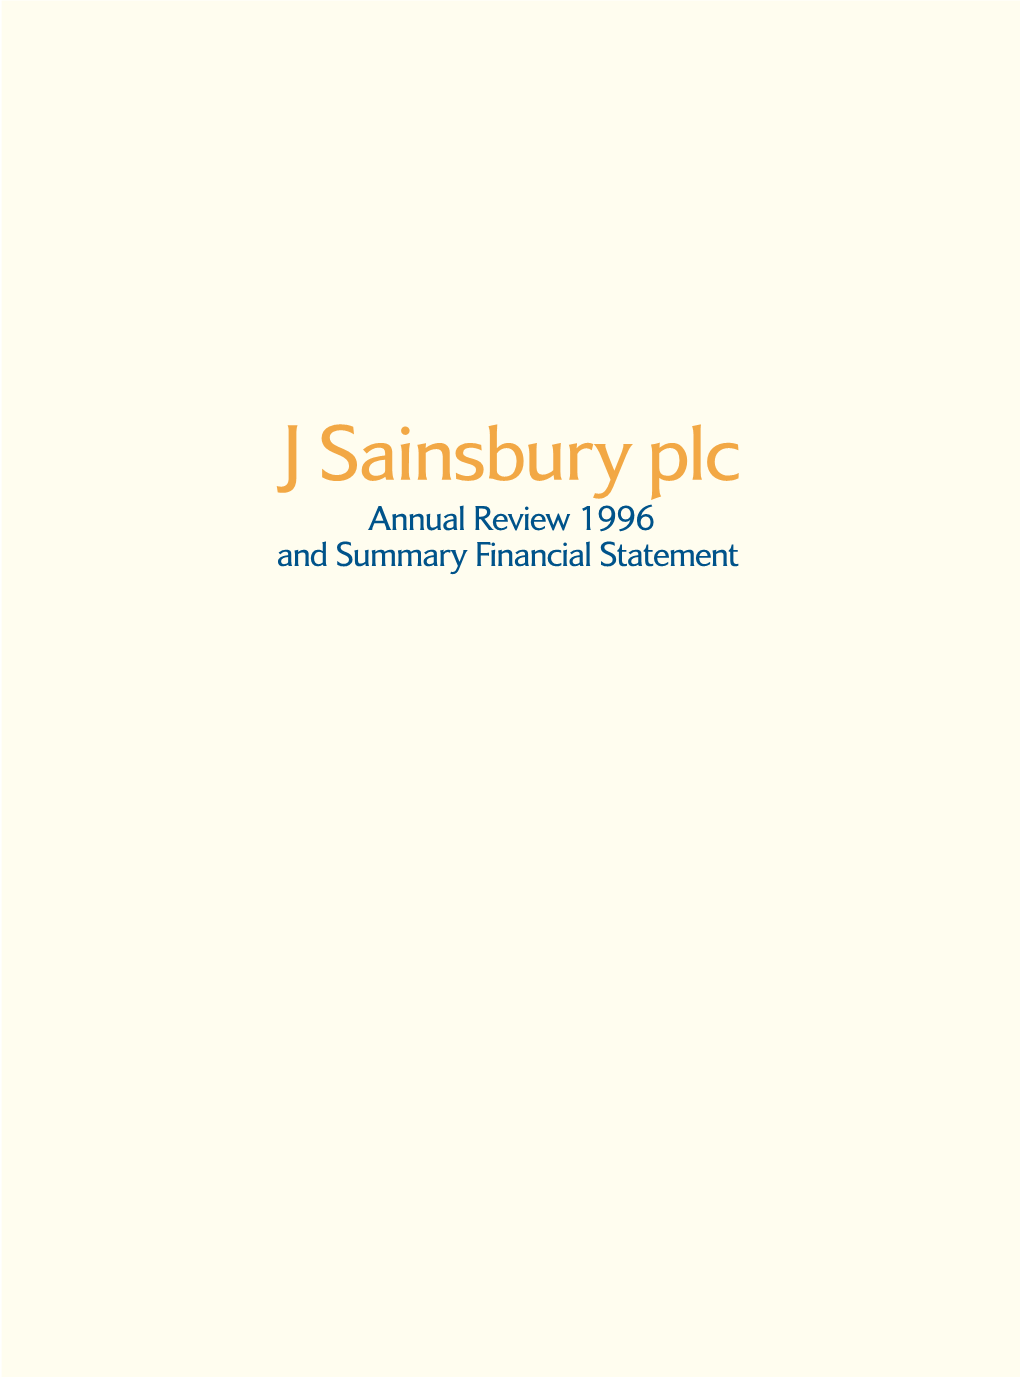 Annual Review 1996 and Summary Financial Statement